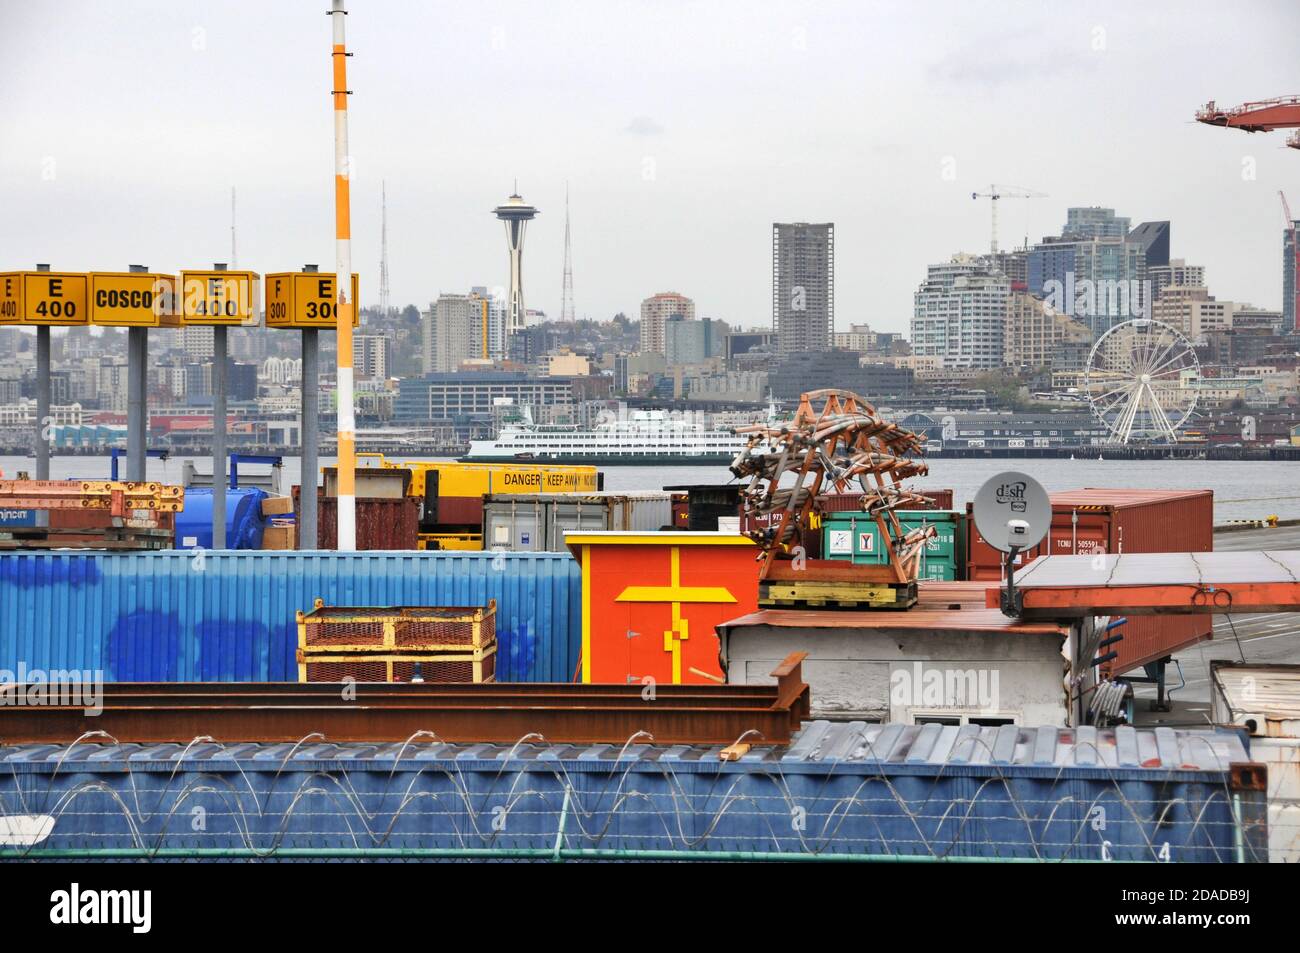 View of shipping dock and Seattle cityscape in the background including Space Needle, Ferris wheel and WA ferry, WA, USA. Stock Photo